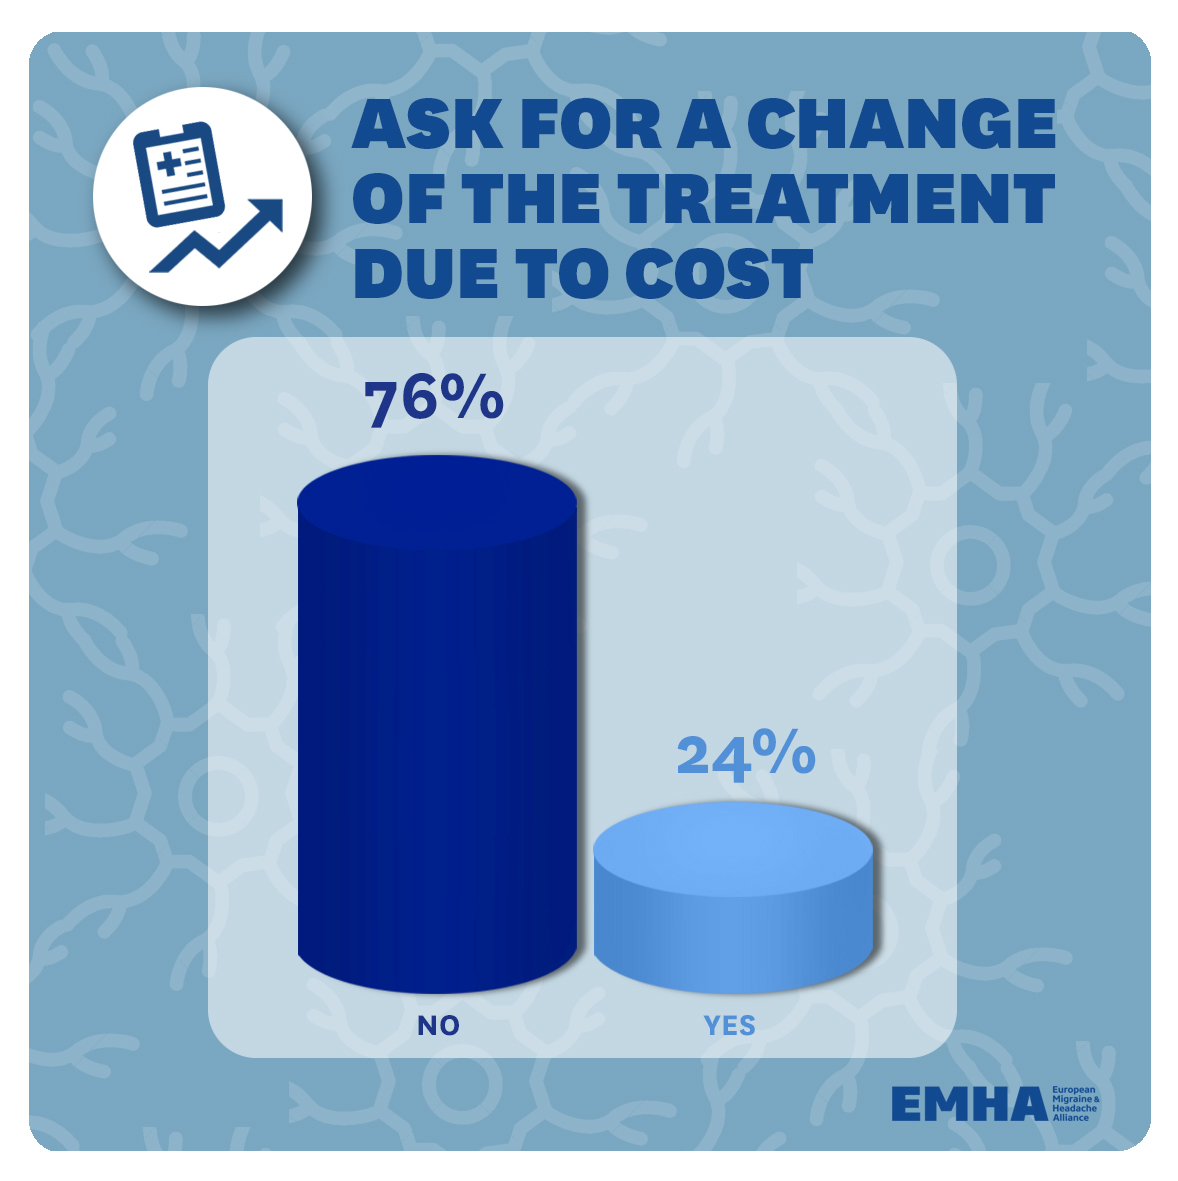 31.-Ask-for-a-change-of-the-treatment